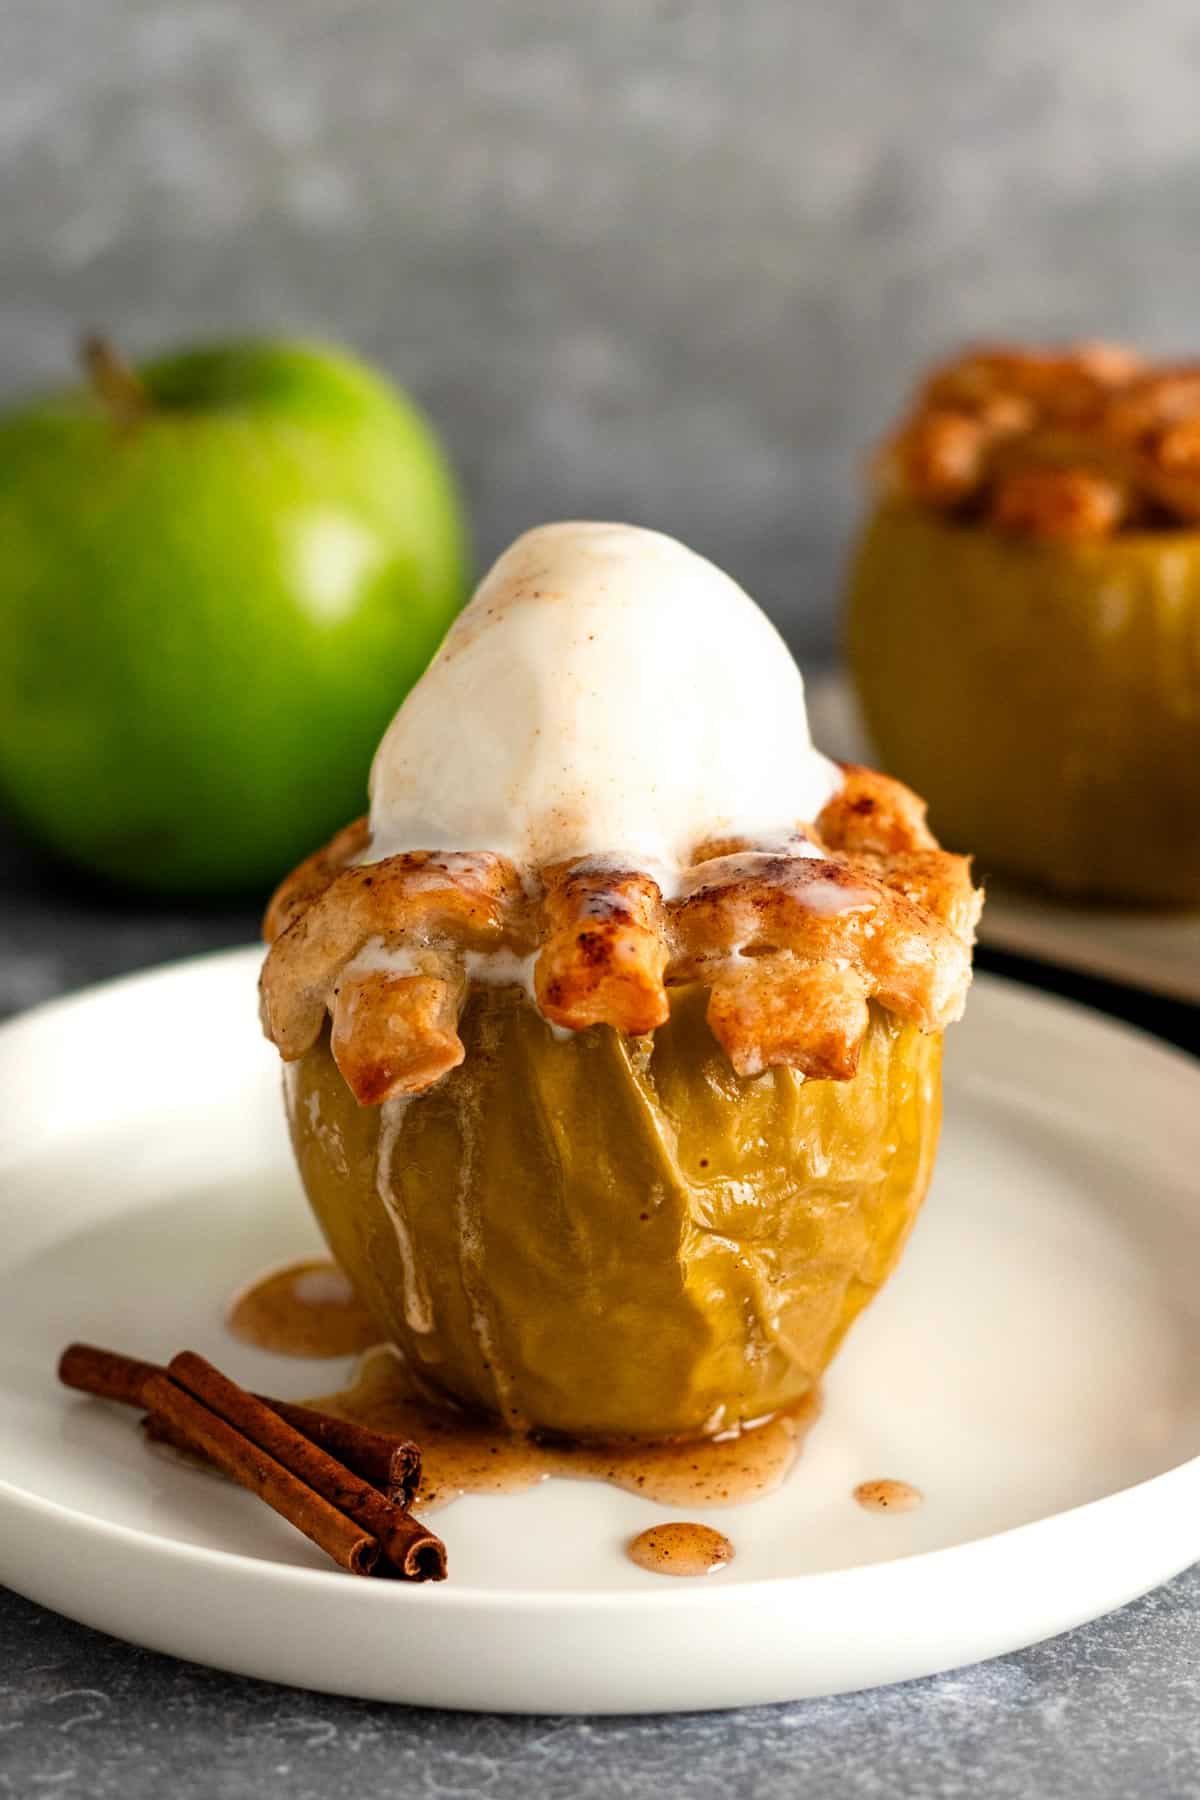 baked green apple on a plate with golden brown dough topping with vanilla ice cream.